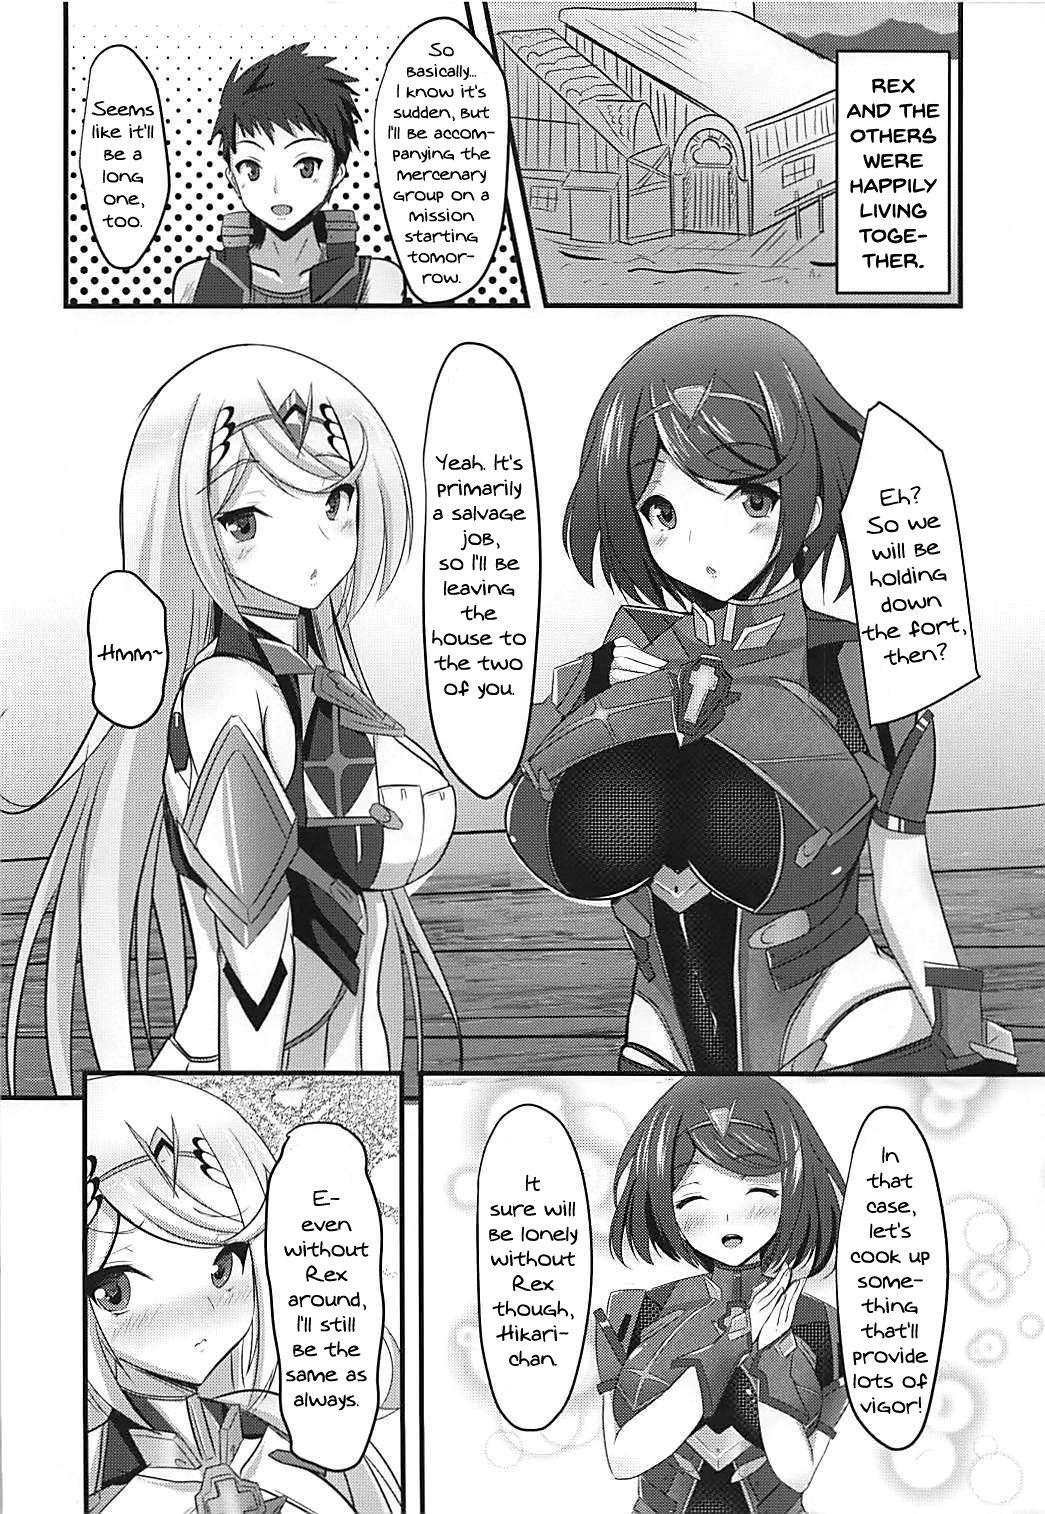 Pool HOMUHIKAex - Xenoblade chronicles 2 Cougar - Page 3